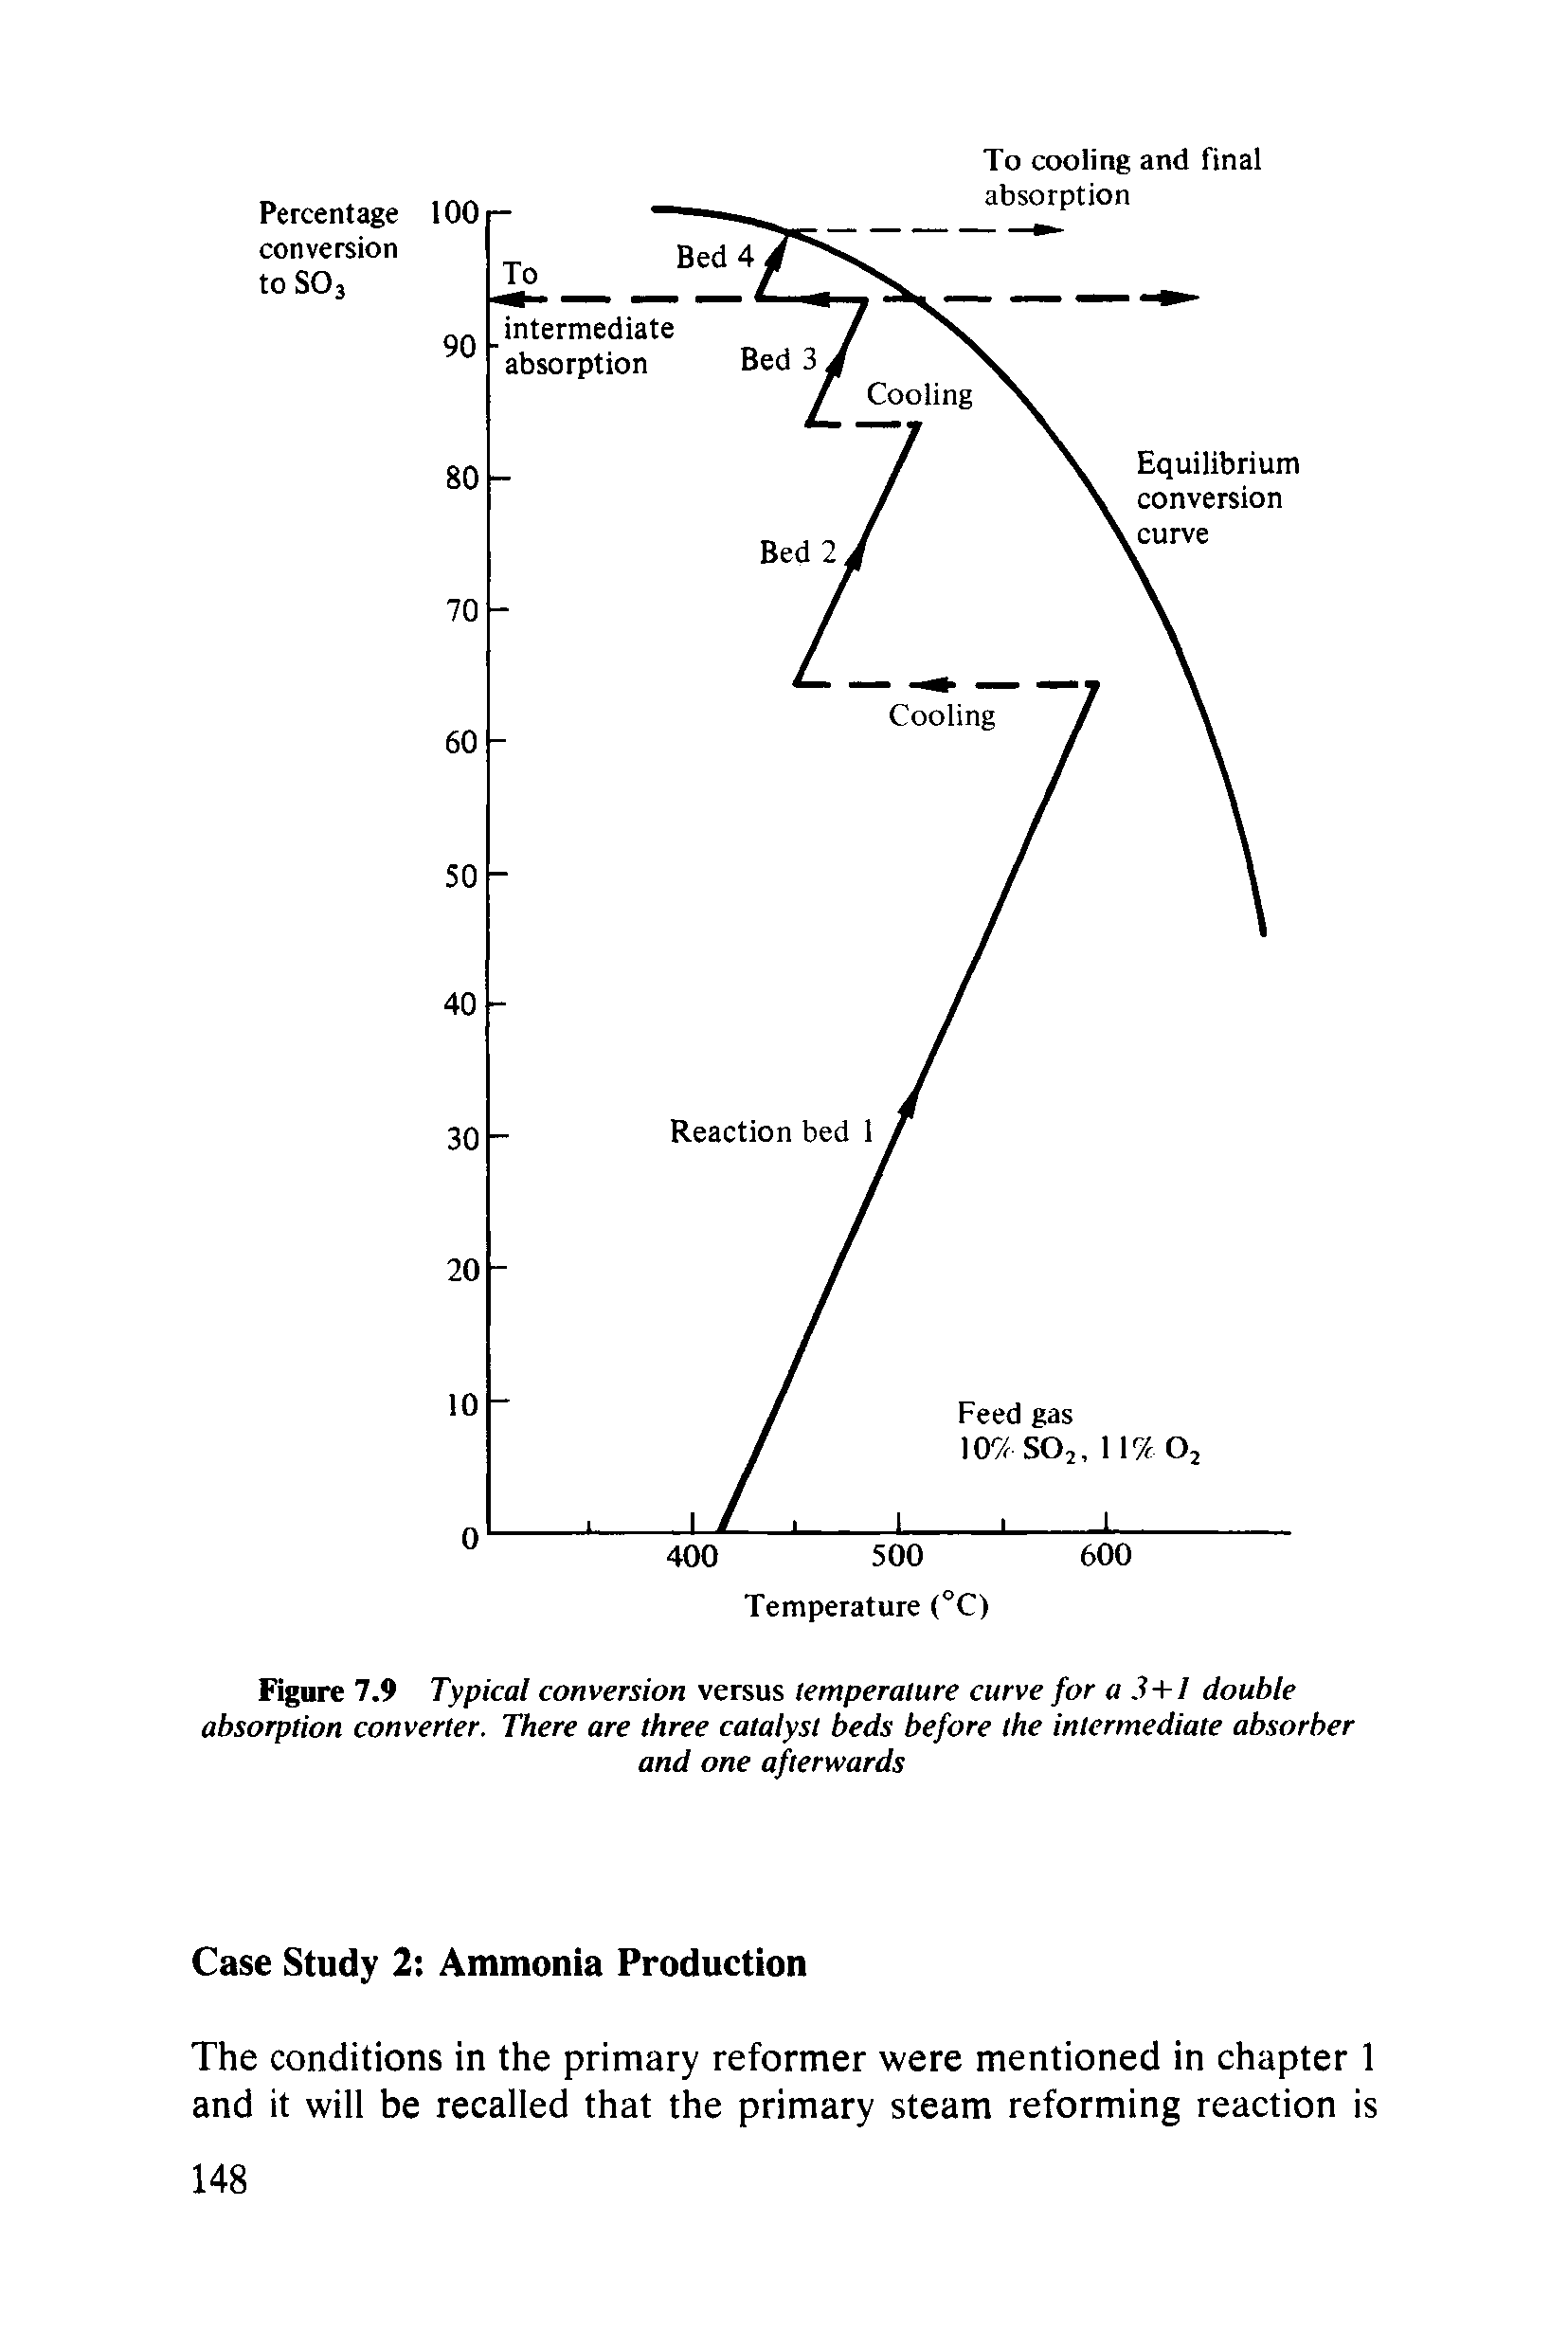 Figure 7.9 Typical conversion versus temperature curve for a 3+1 double absorption converter. There are three catalyst beds before the intermediate absorber...